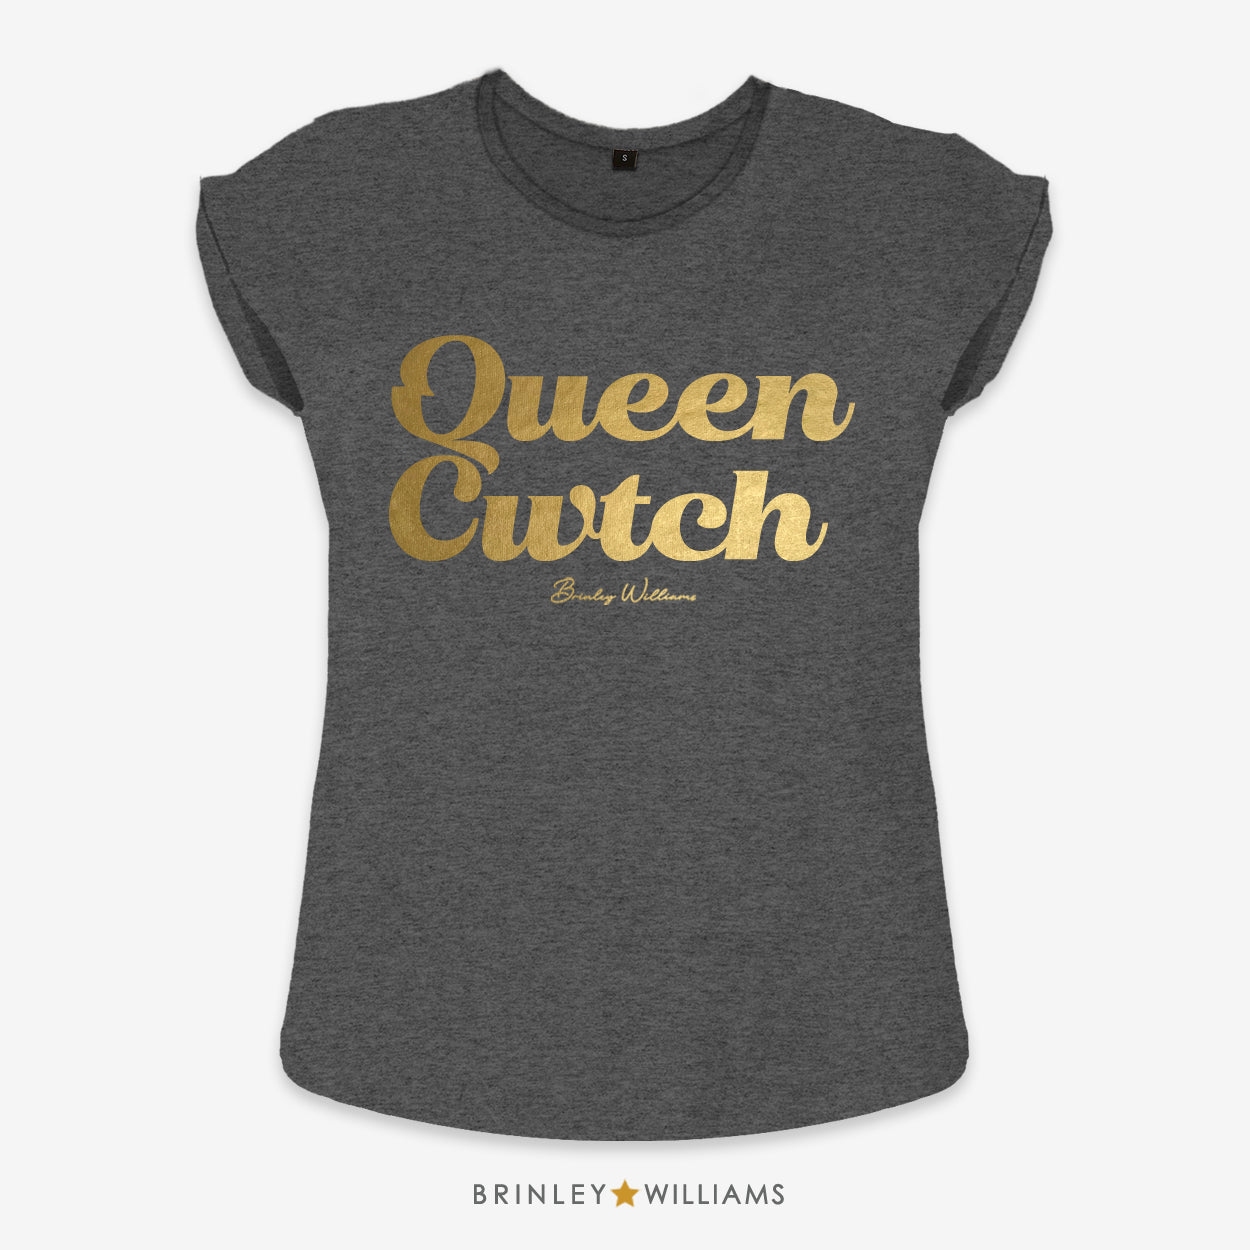 Queen Cwtch Rolled Sleeve T-shirt - Charcoal